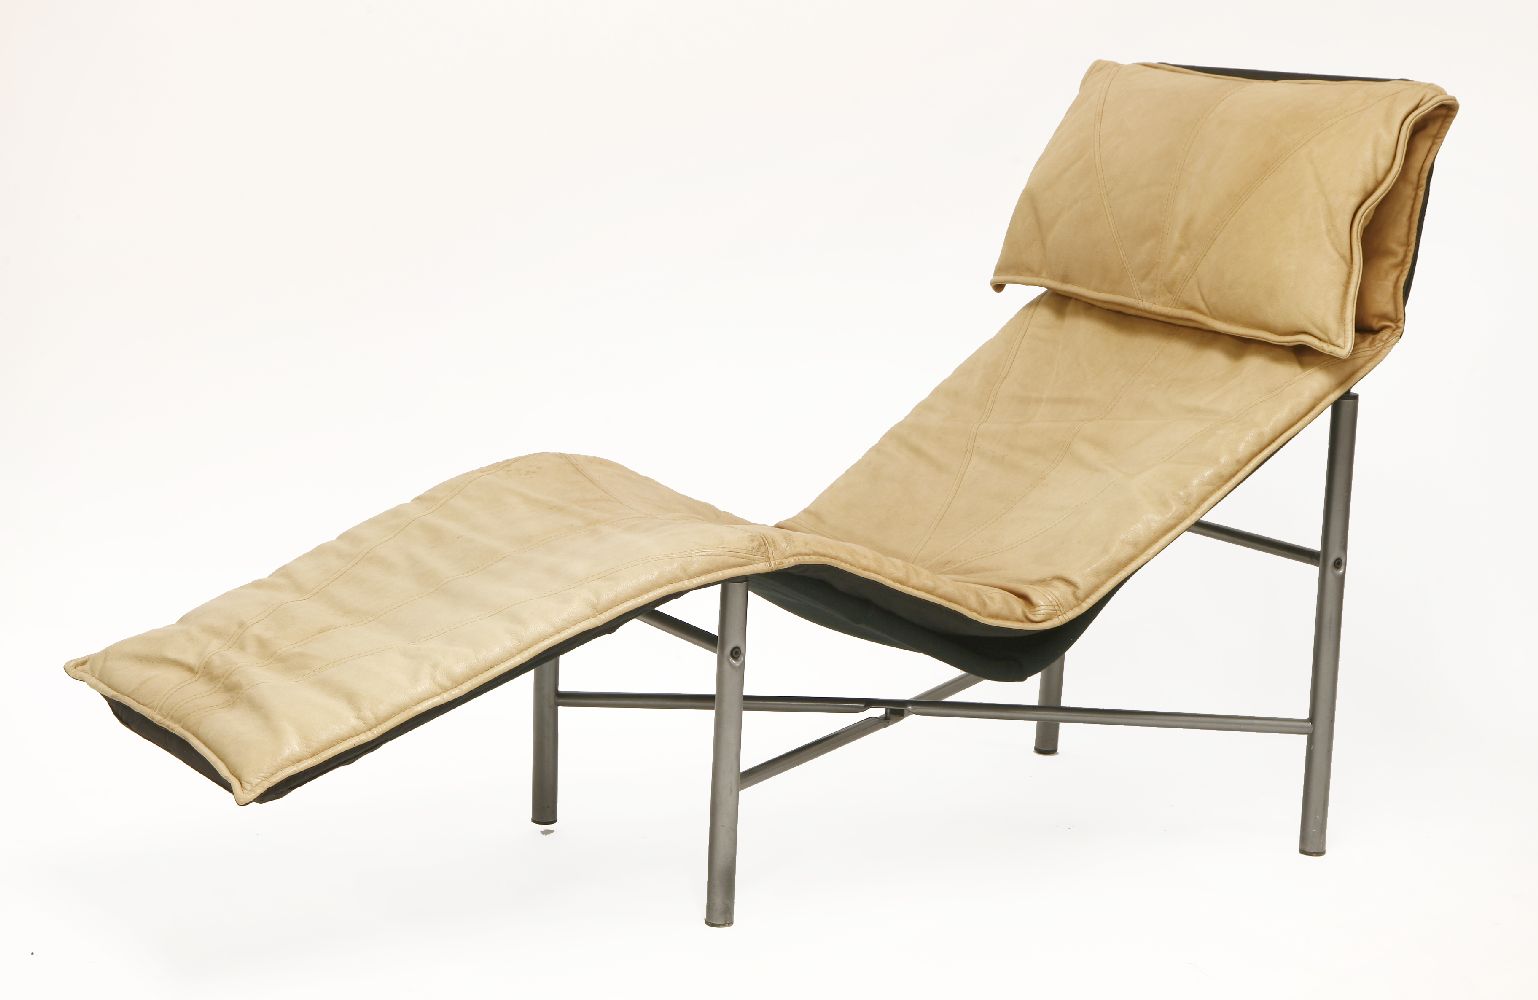 A 'Skye' lounger, designed by Tord Björklund for Ikea in tan leather, 160cm wide